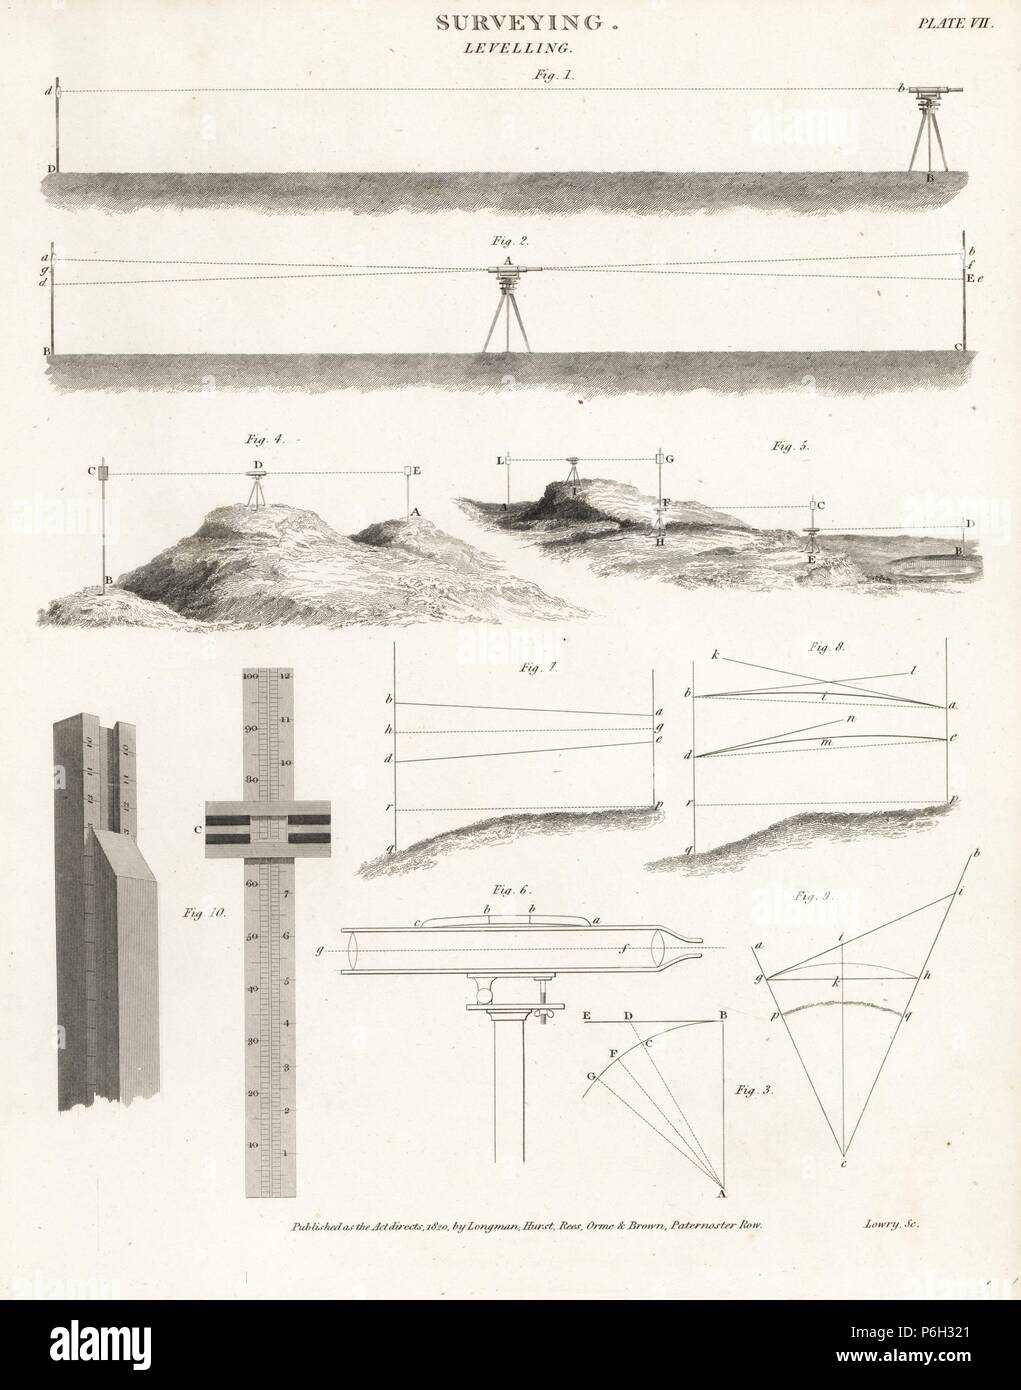 Surveying equipment from the 19th century: levelling instruments. Copperplate engraving by Wilson Lowry from Abraham Rees' 'Cyclopedia or Universal Dictionary,' London, 1811. Stock Photo